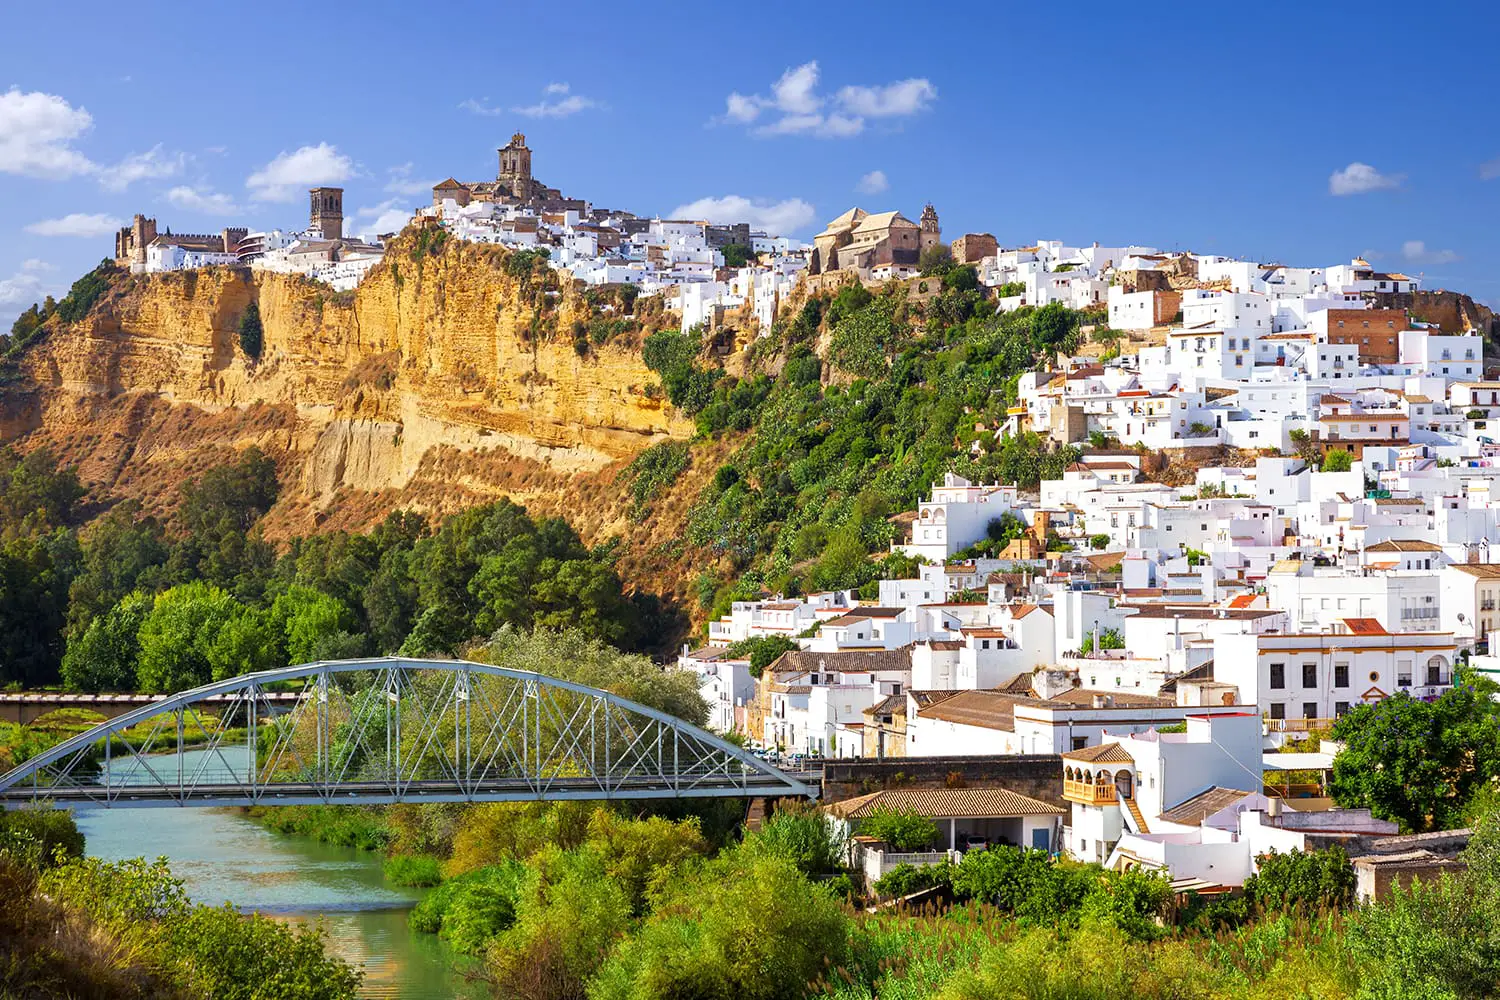 Panoramic of Arcos de la Frontera, white town built on a rock along Guadalete river, in the province of Cadiz, Spain